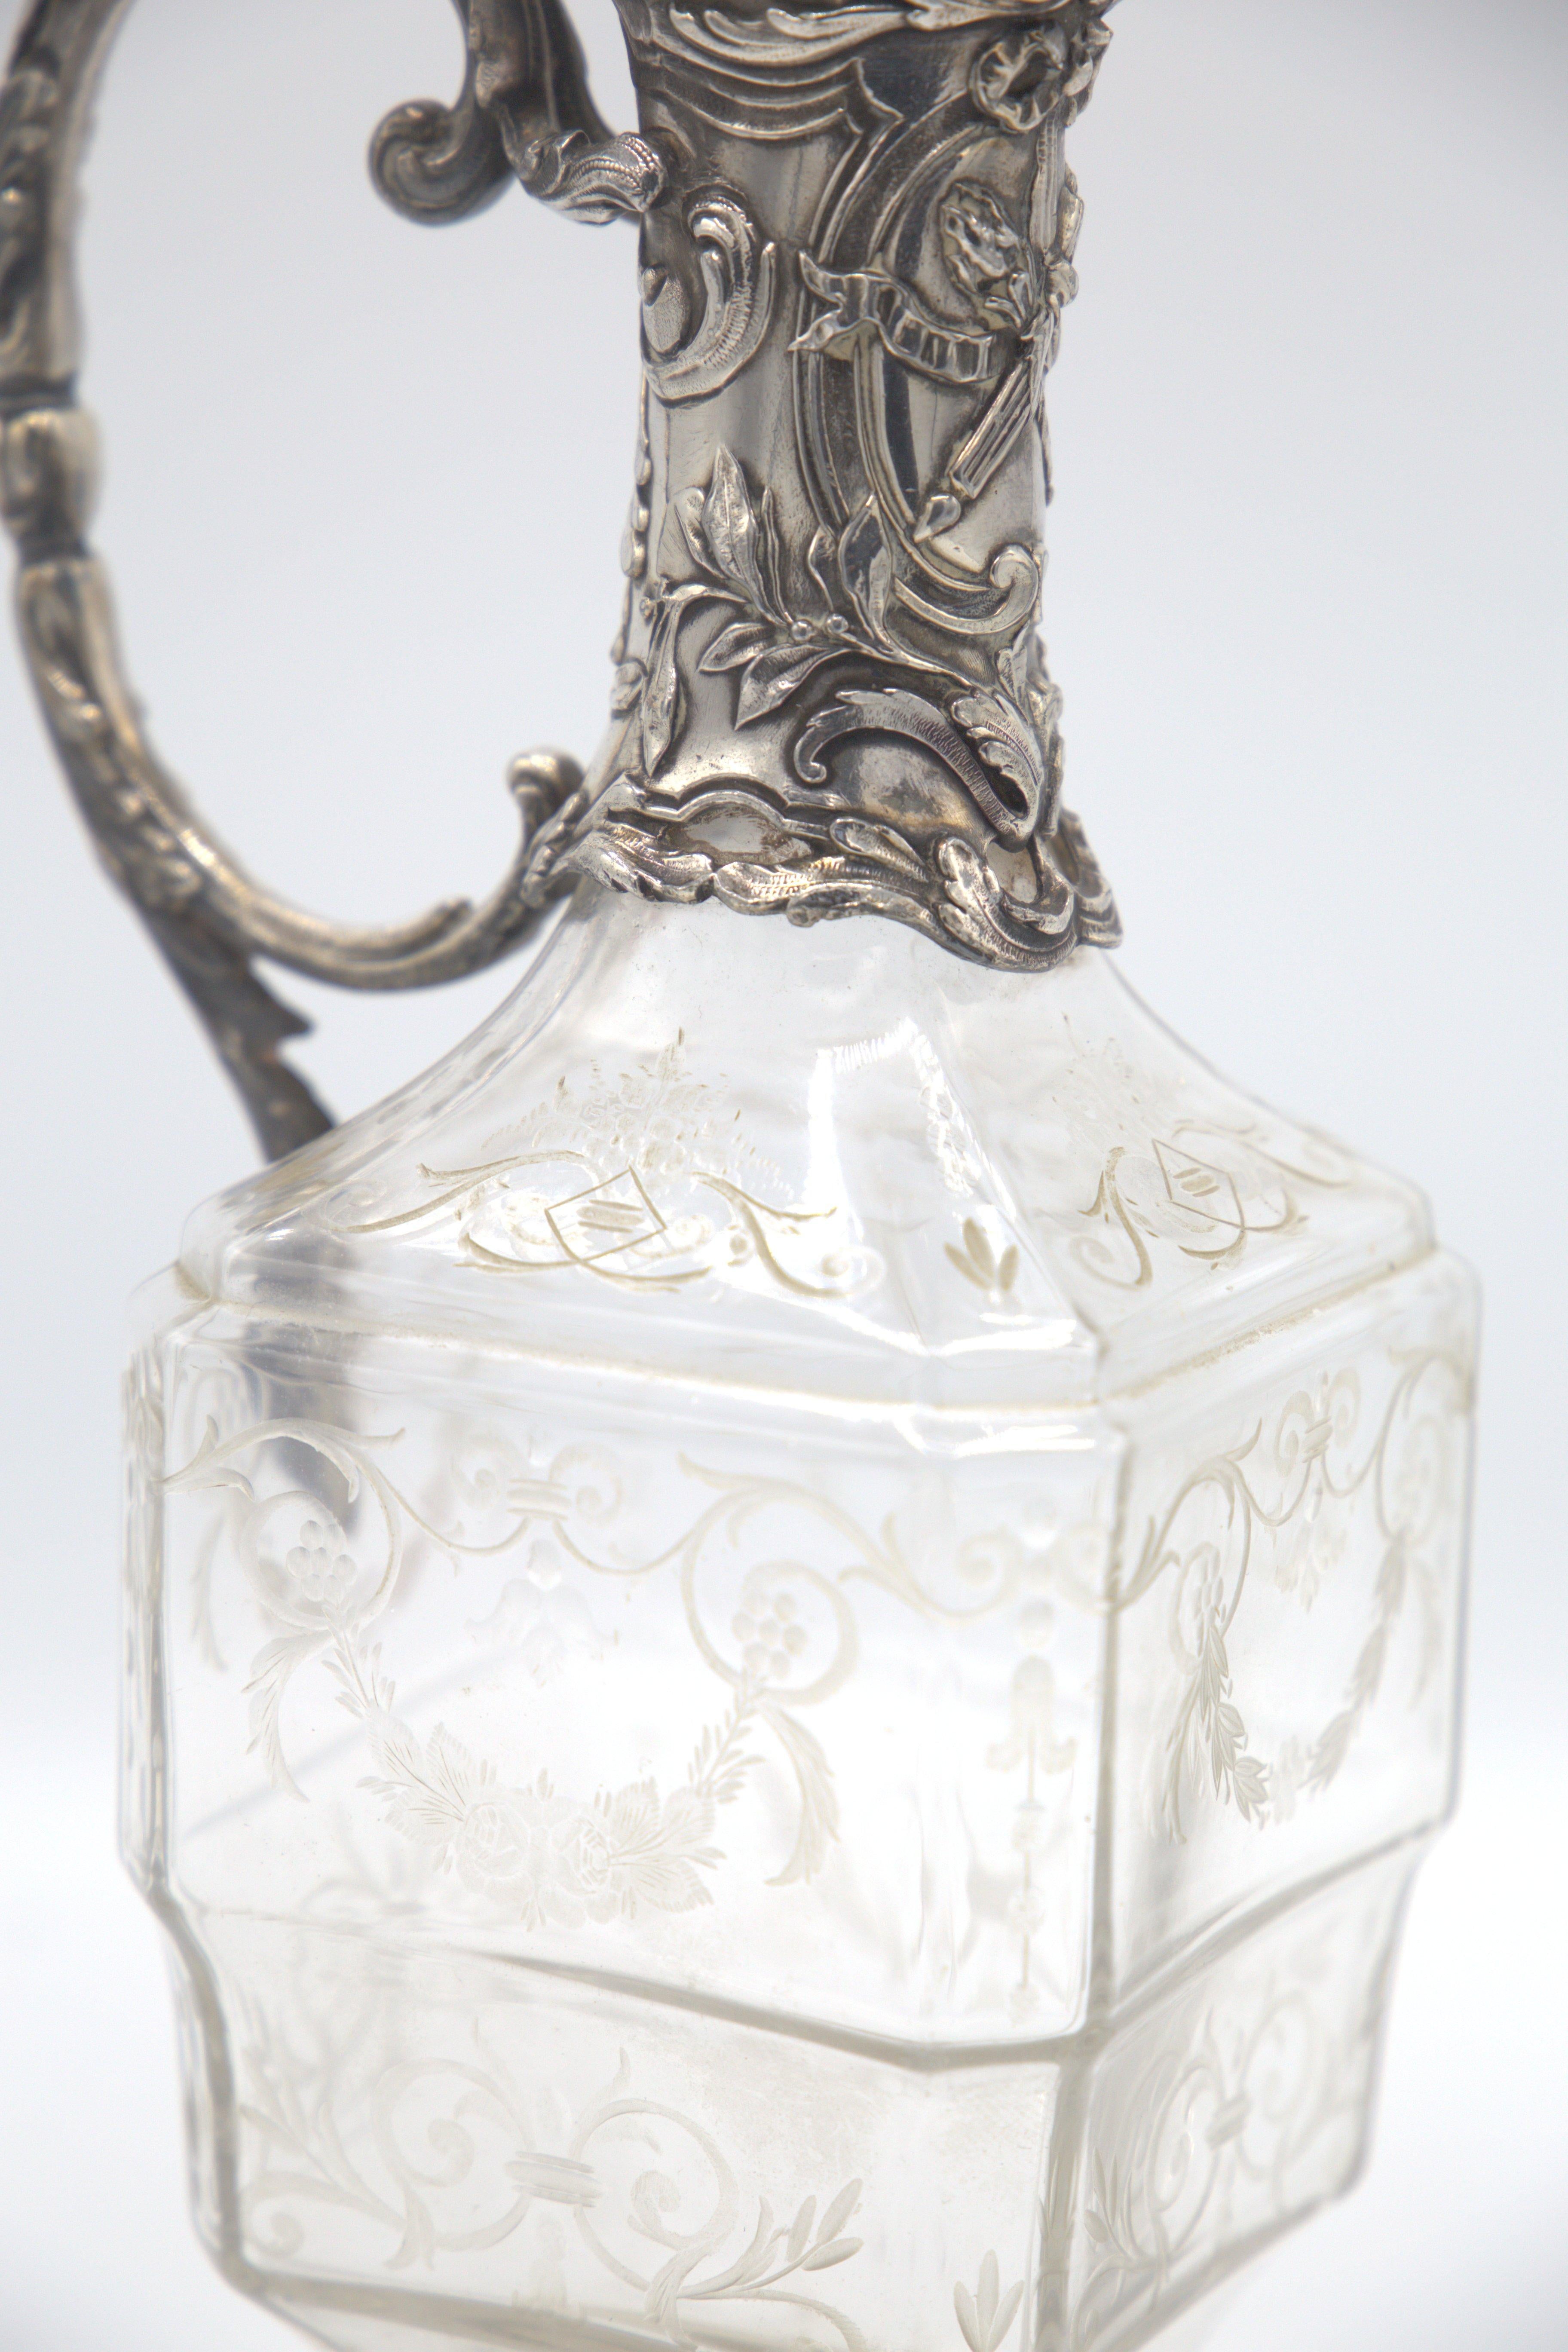 Gorgeous silver jug of Baracat production, late 1800s.
The jug is made of worked and carved silver in the round base and spout, while the central body is made of glass.
The spout opens through an elongation of the cap that closes, has the shape of